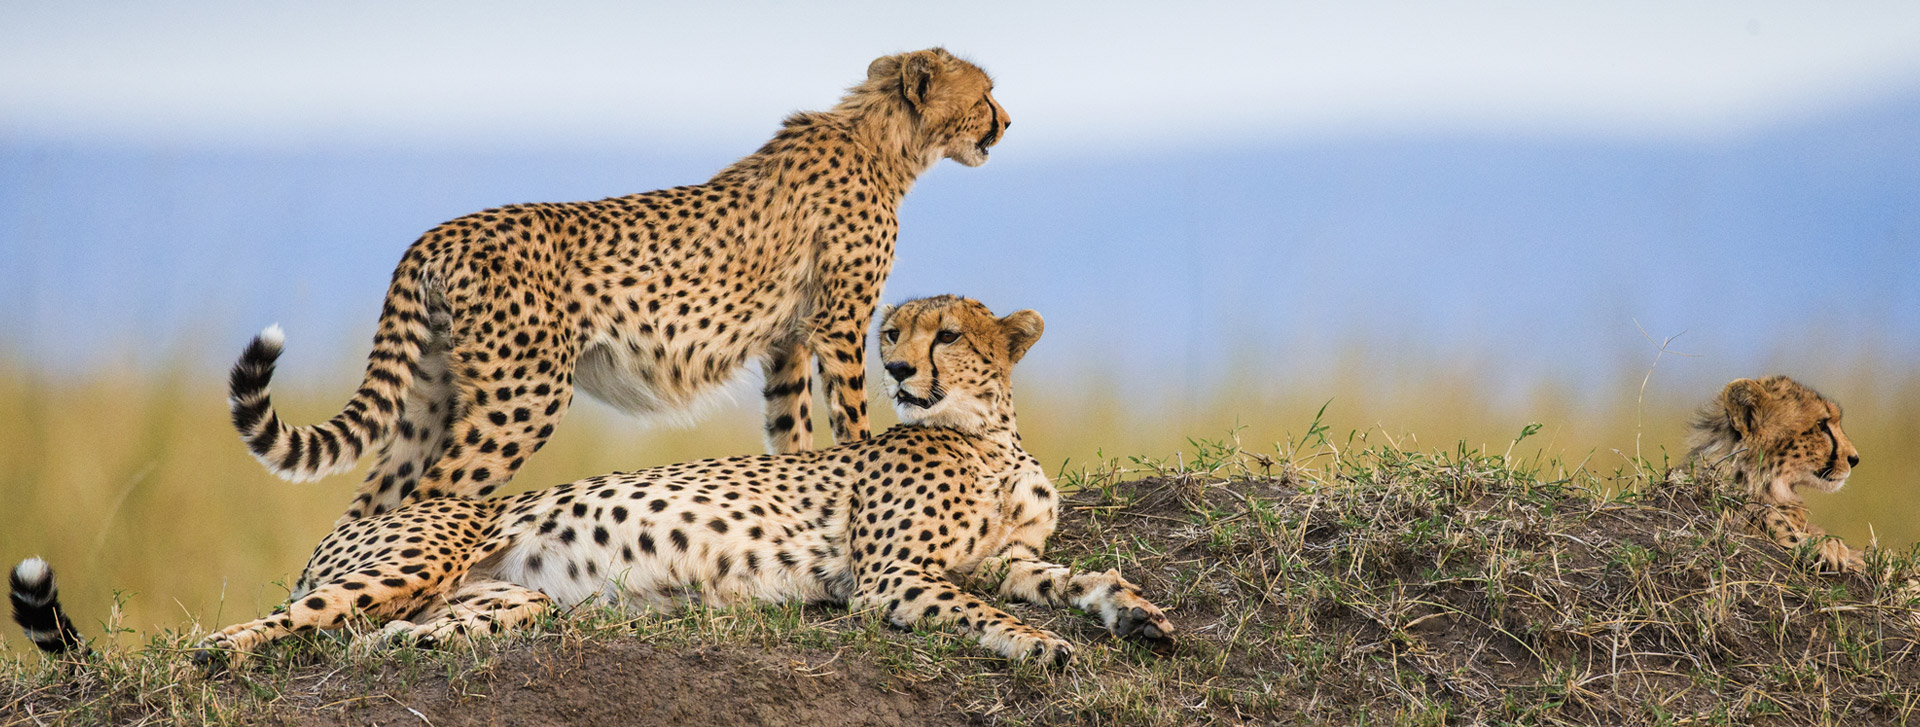 Serengeti is home to the Big Five